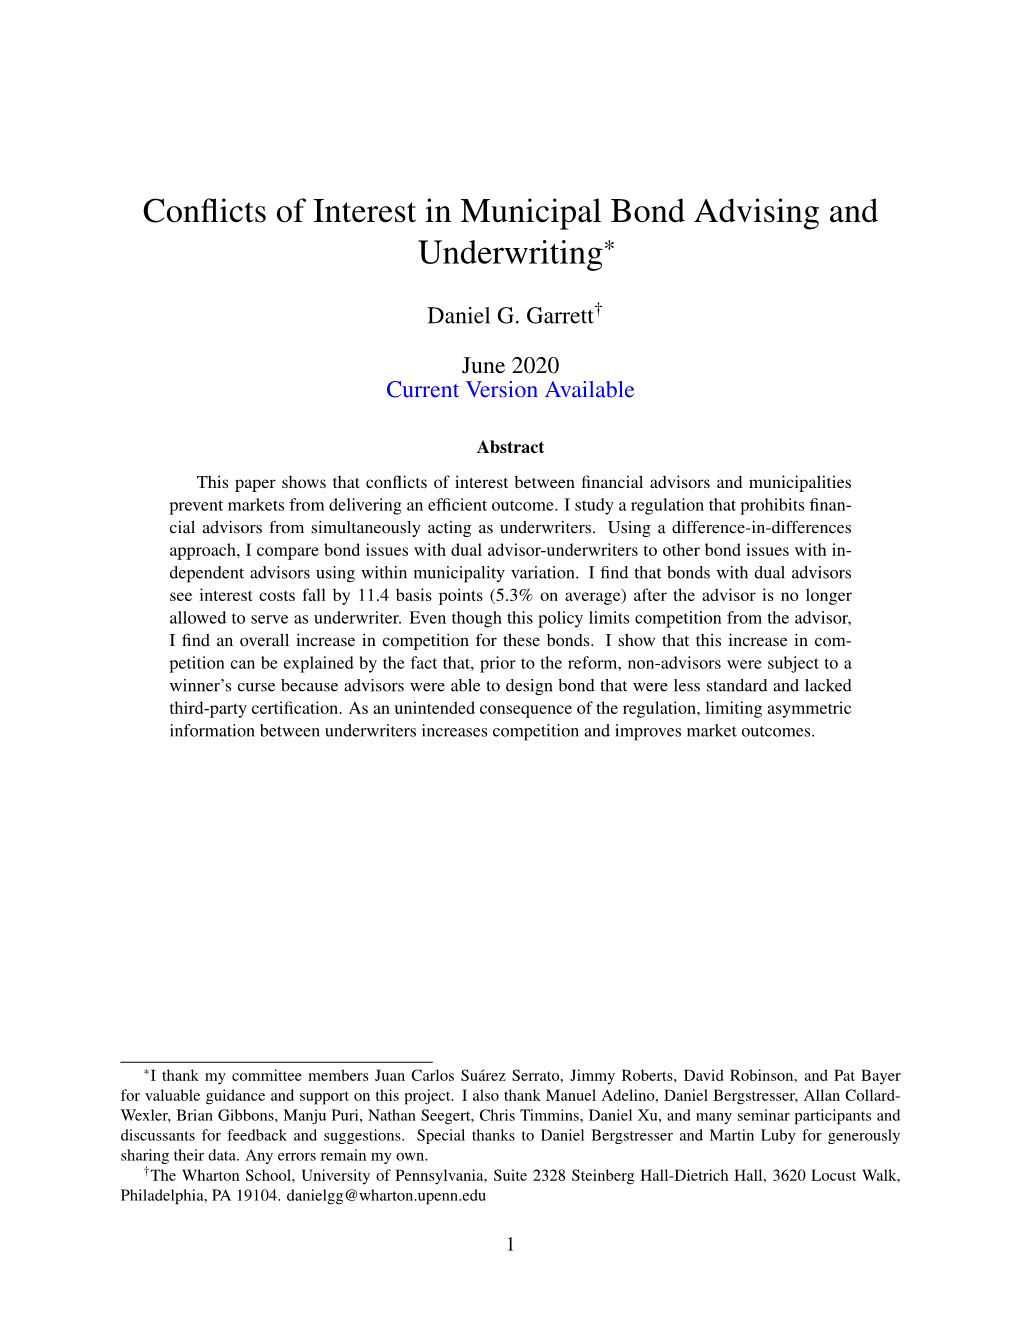 Conflicts of Interest in Muni Debt Markets